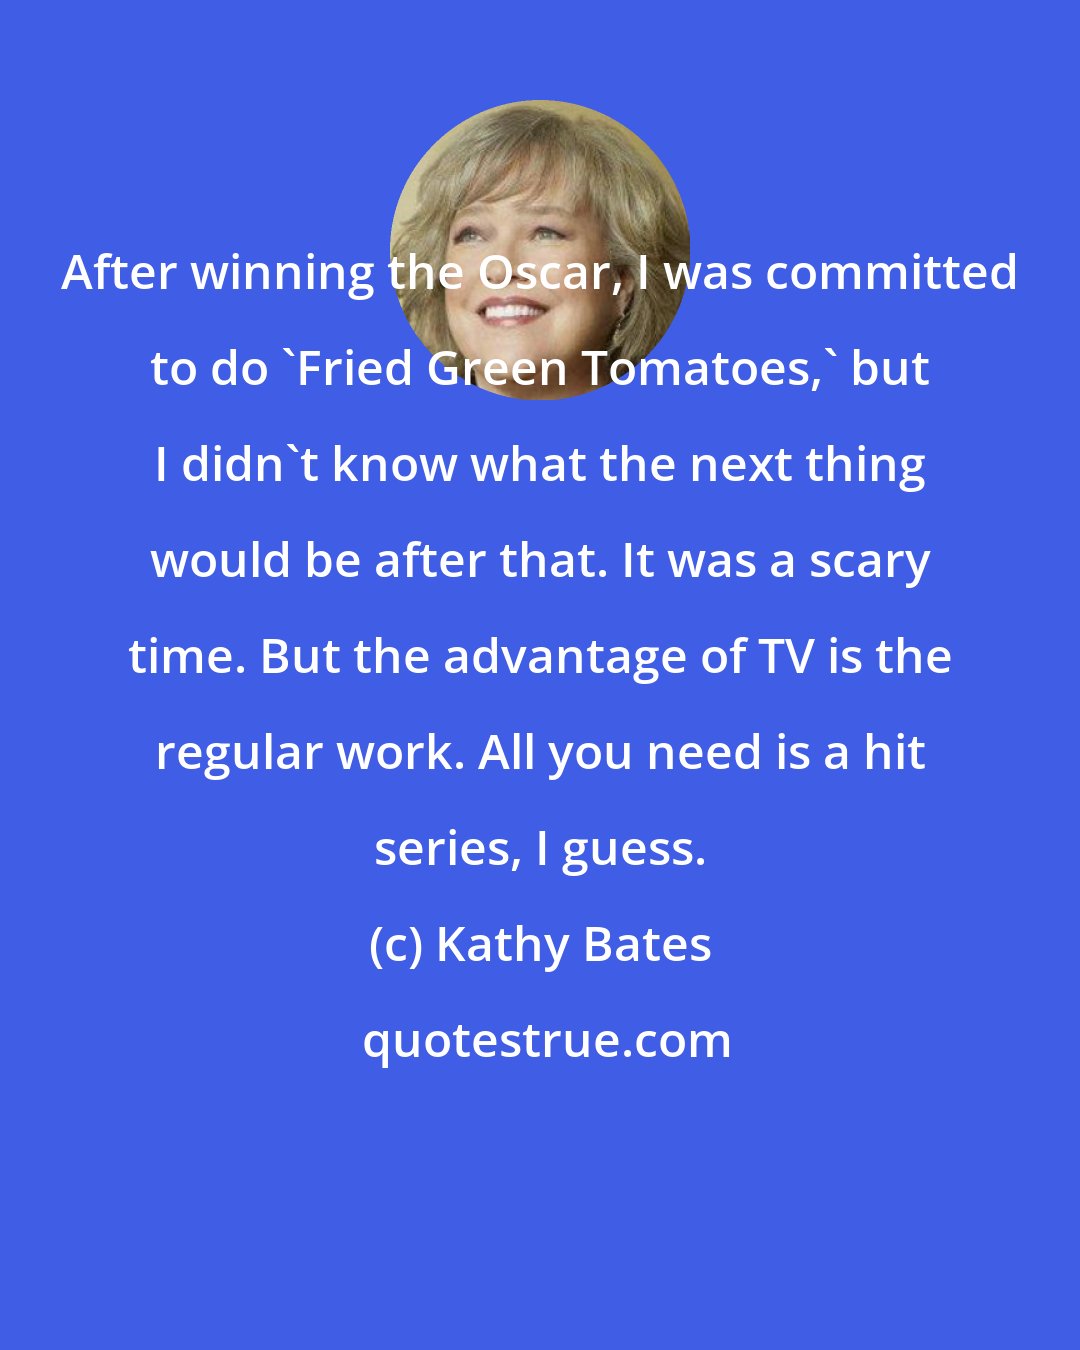 Kathy Bates: After winning the Oscar, I was committed to do 'Fried Green Tomatoes,' but I didn't know what the next thing would be after that. It was a scary time. But the advantage of TV is the regular work. All you need is a hit series, I guess.